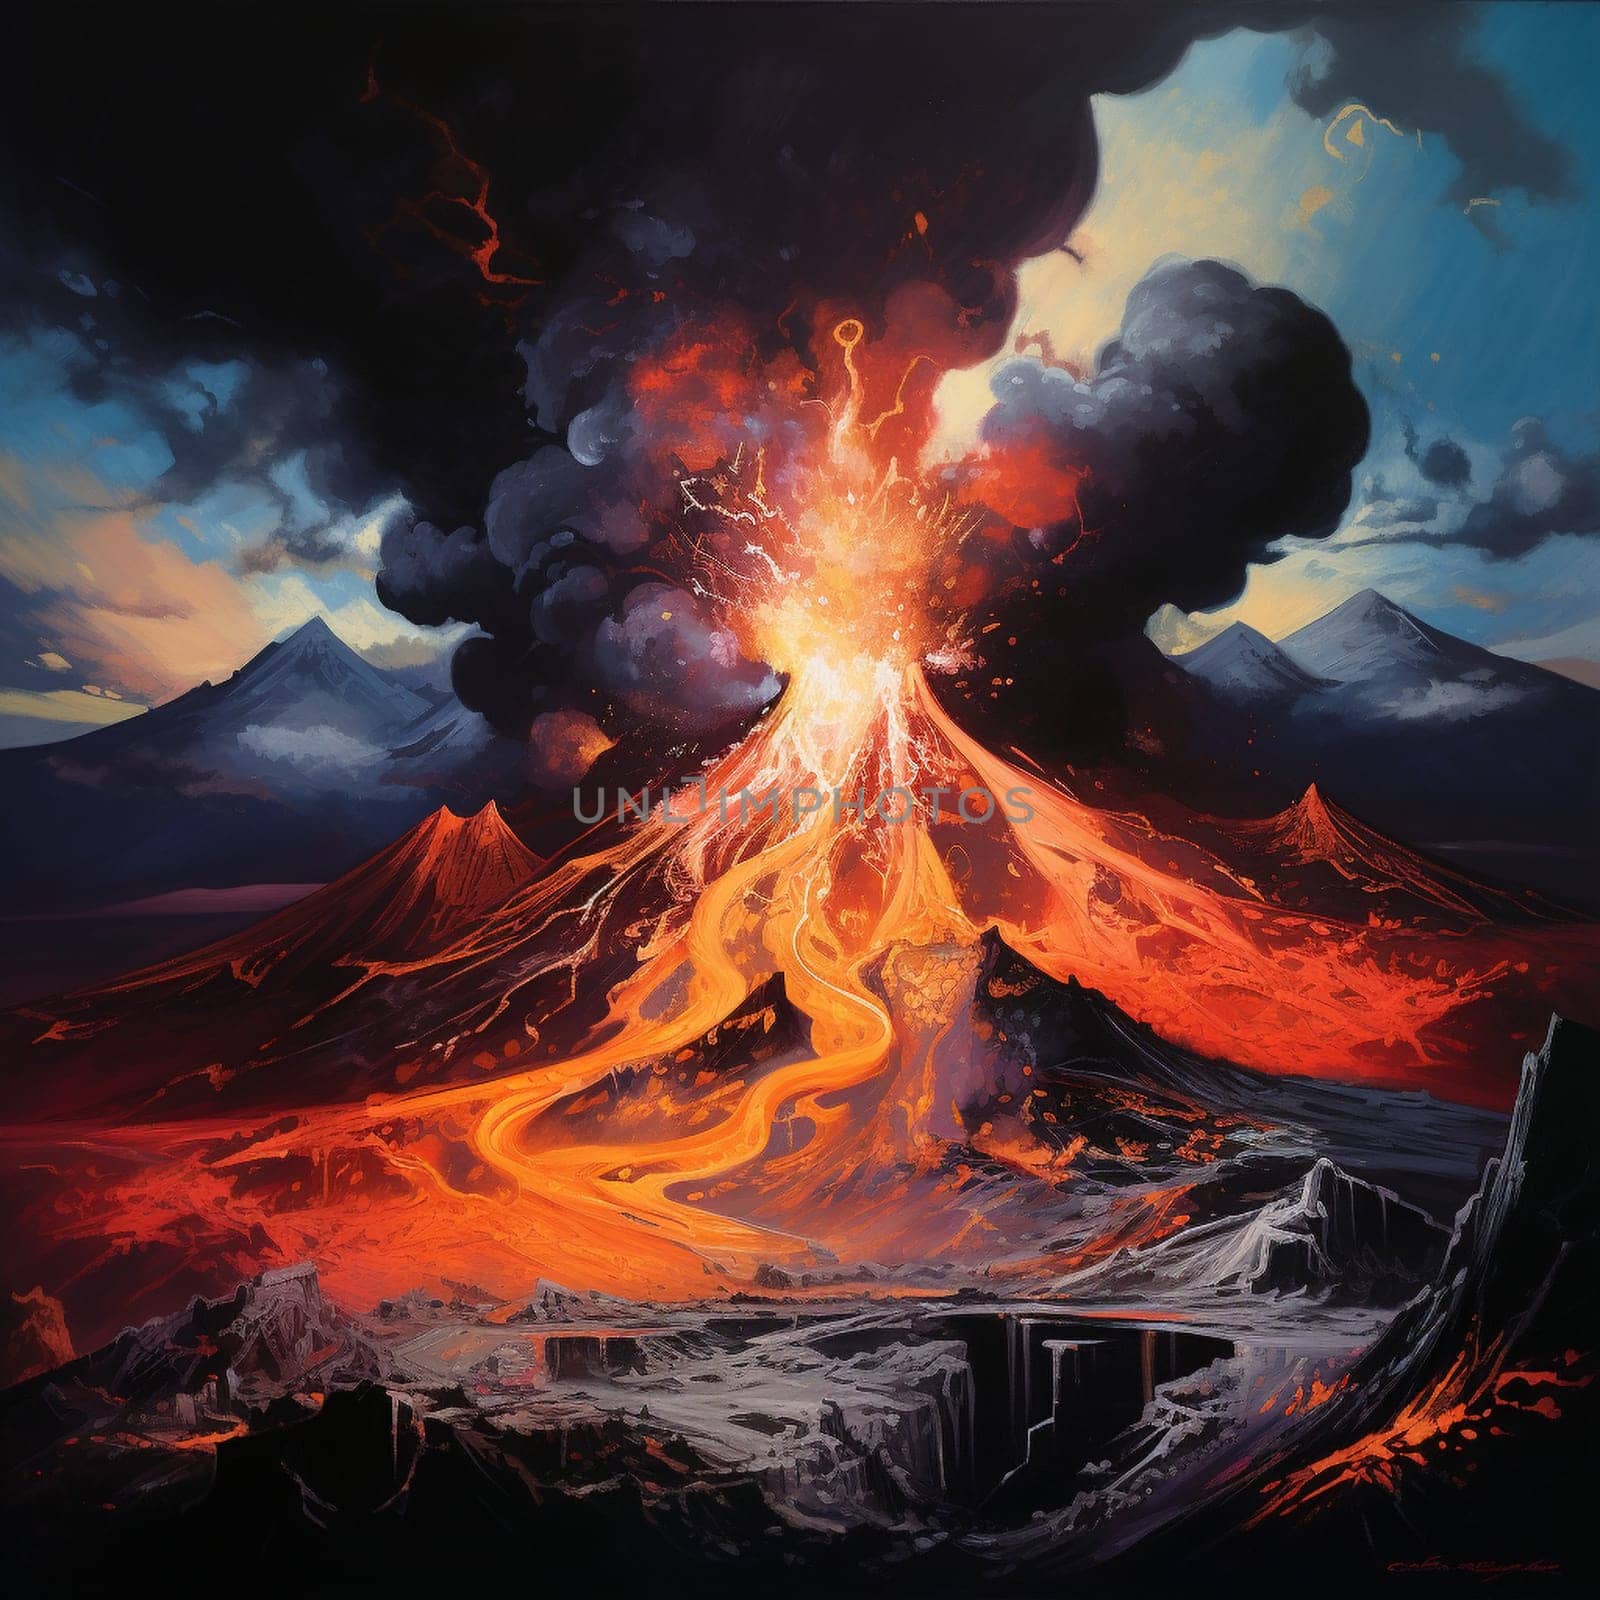 Be mesmerized by the breathtaking volcanic eruption in this vibrant and dynamic artwork. The scene captures the raw energy and destructive force of nature, with billowing smoke and ash, glowing hot lava cascading down the mountainside, and an intense fiery glow illuminating the night sky. The composition evokes a sense of awe and power, captivating viewers with its vivid depiction of the volcanic eruption.